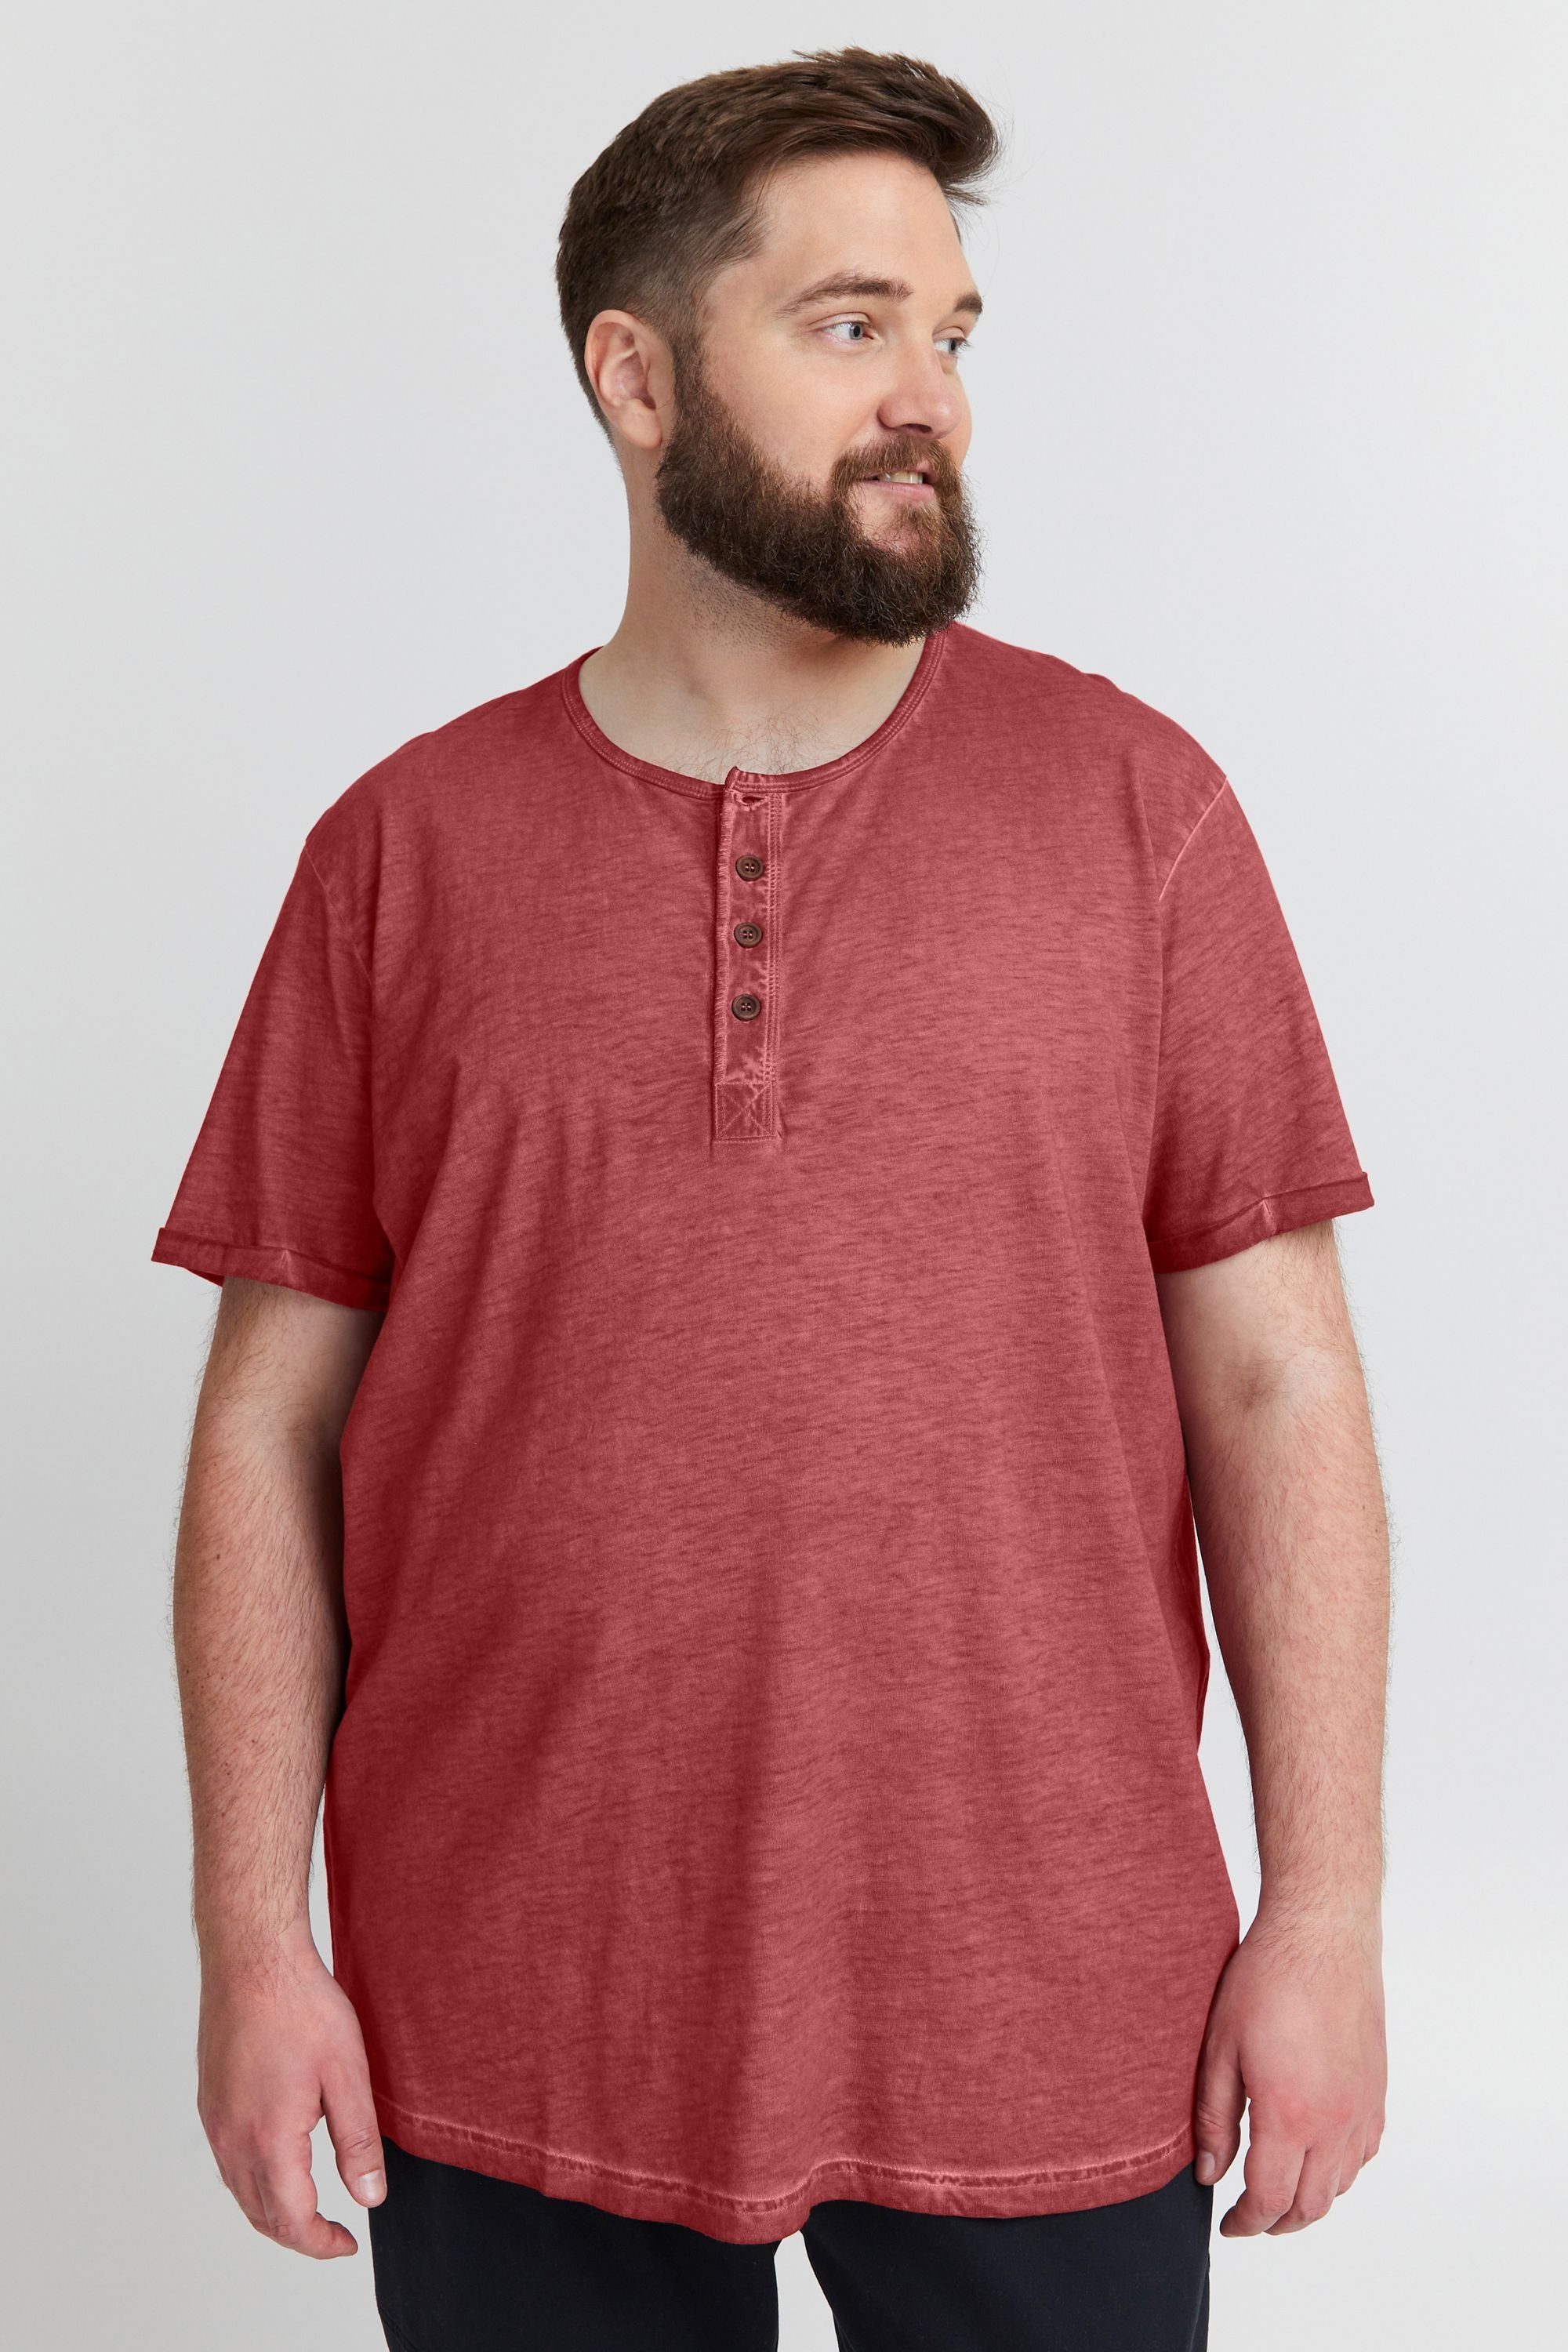 !Solid T-Shirt SDTihn BT WINE RED (790985)